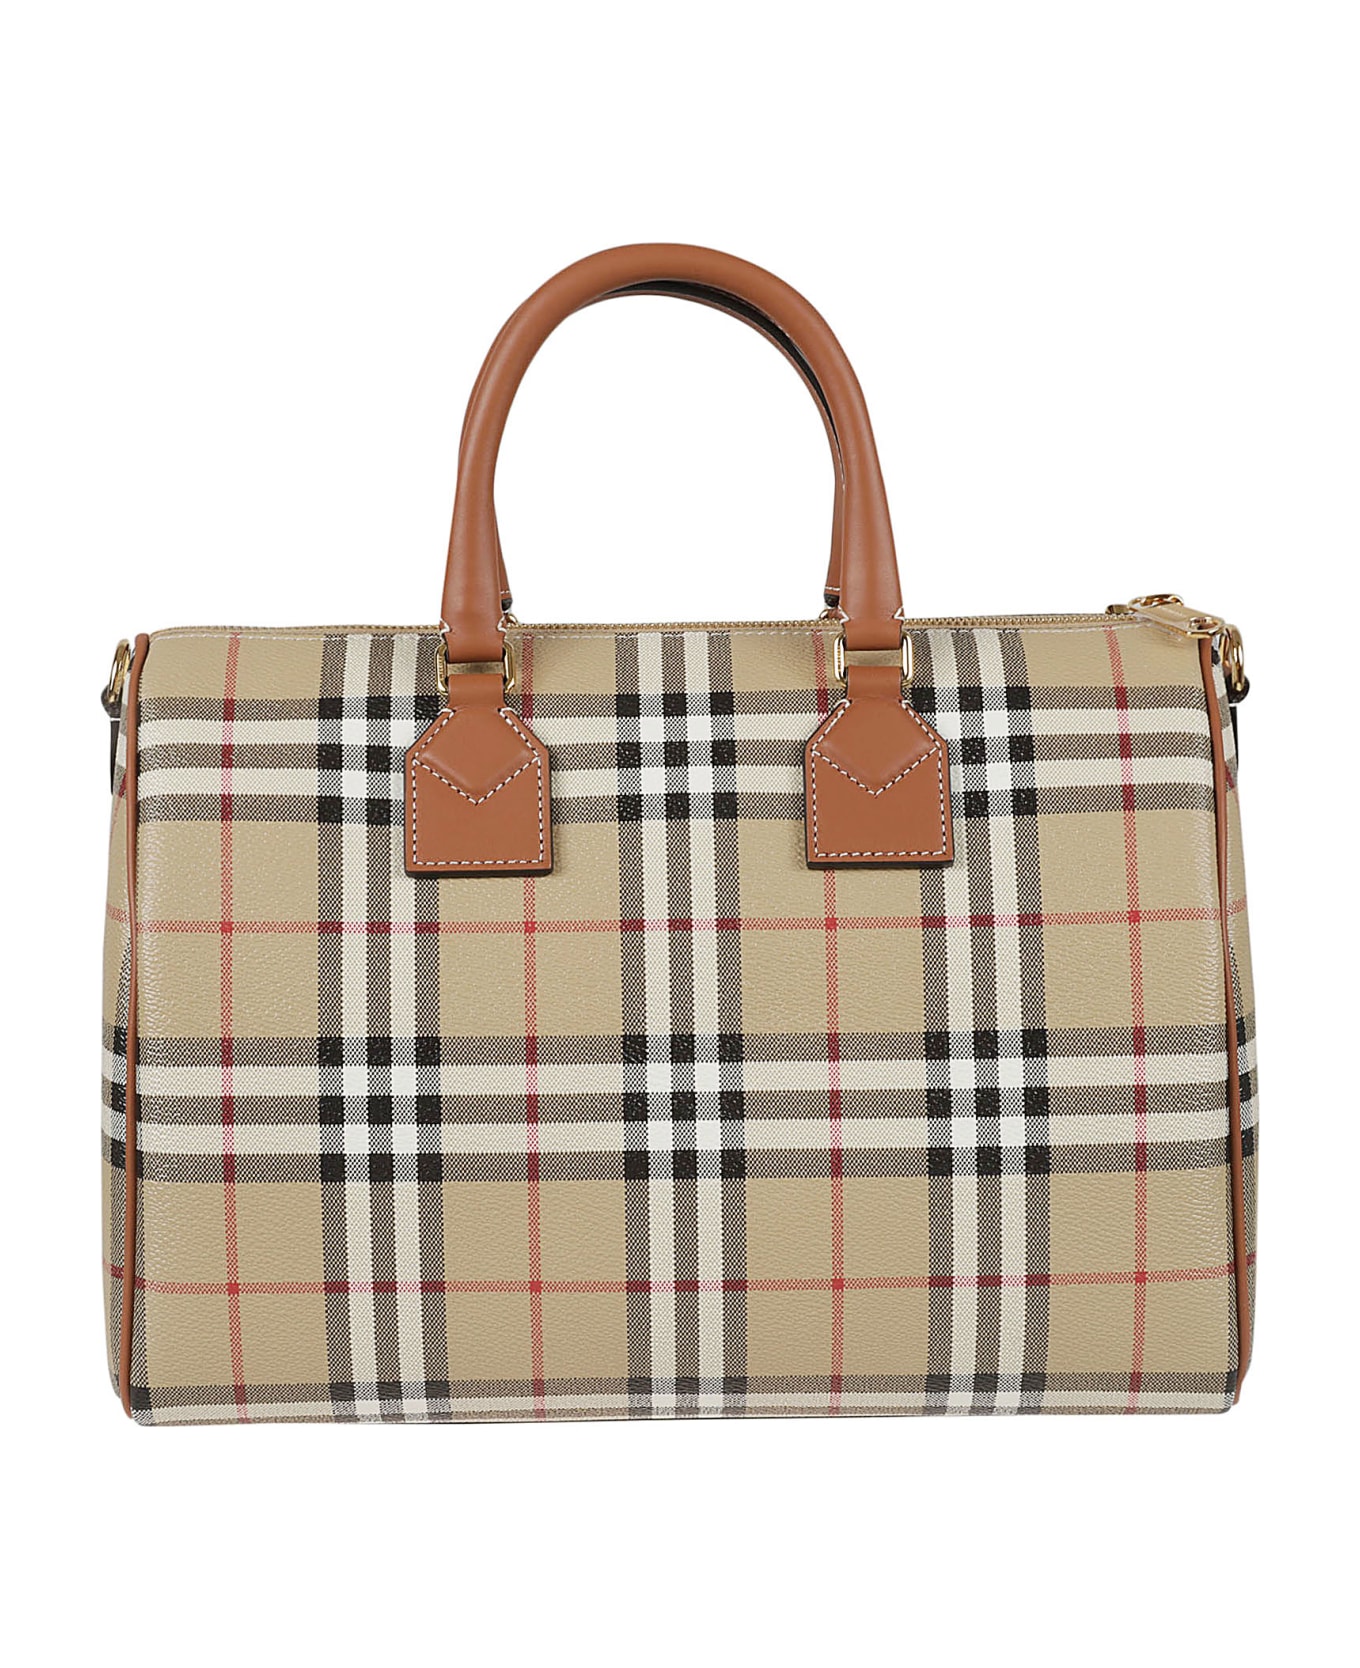 Burberry Top Handle Check Tote - Beige